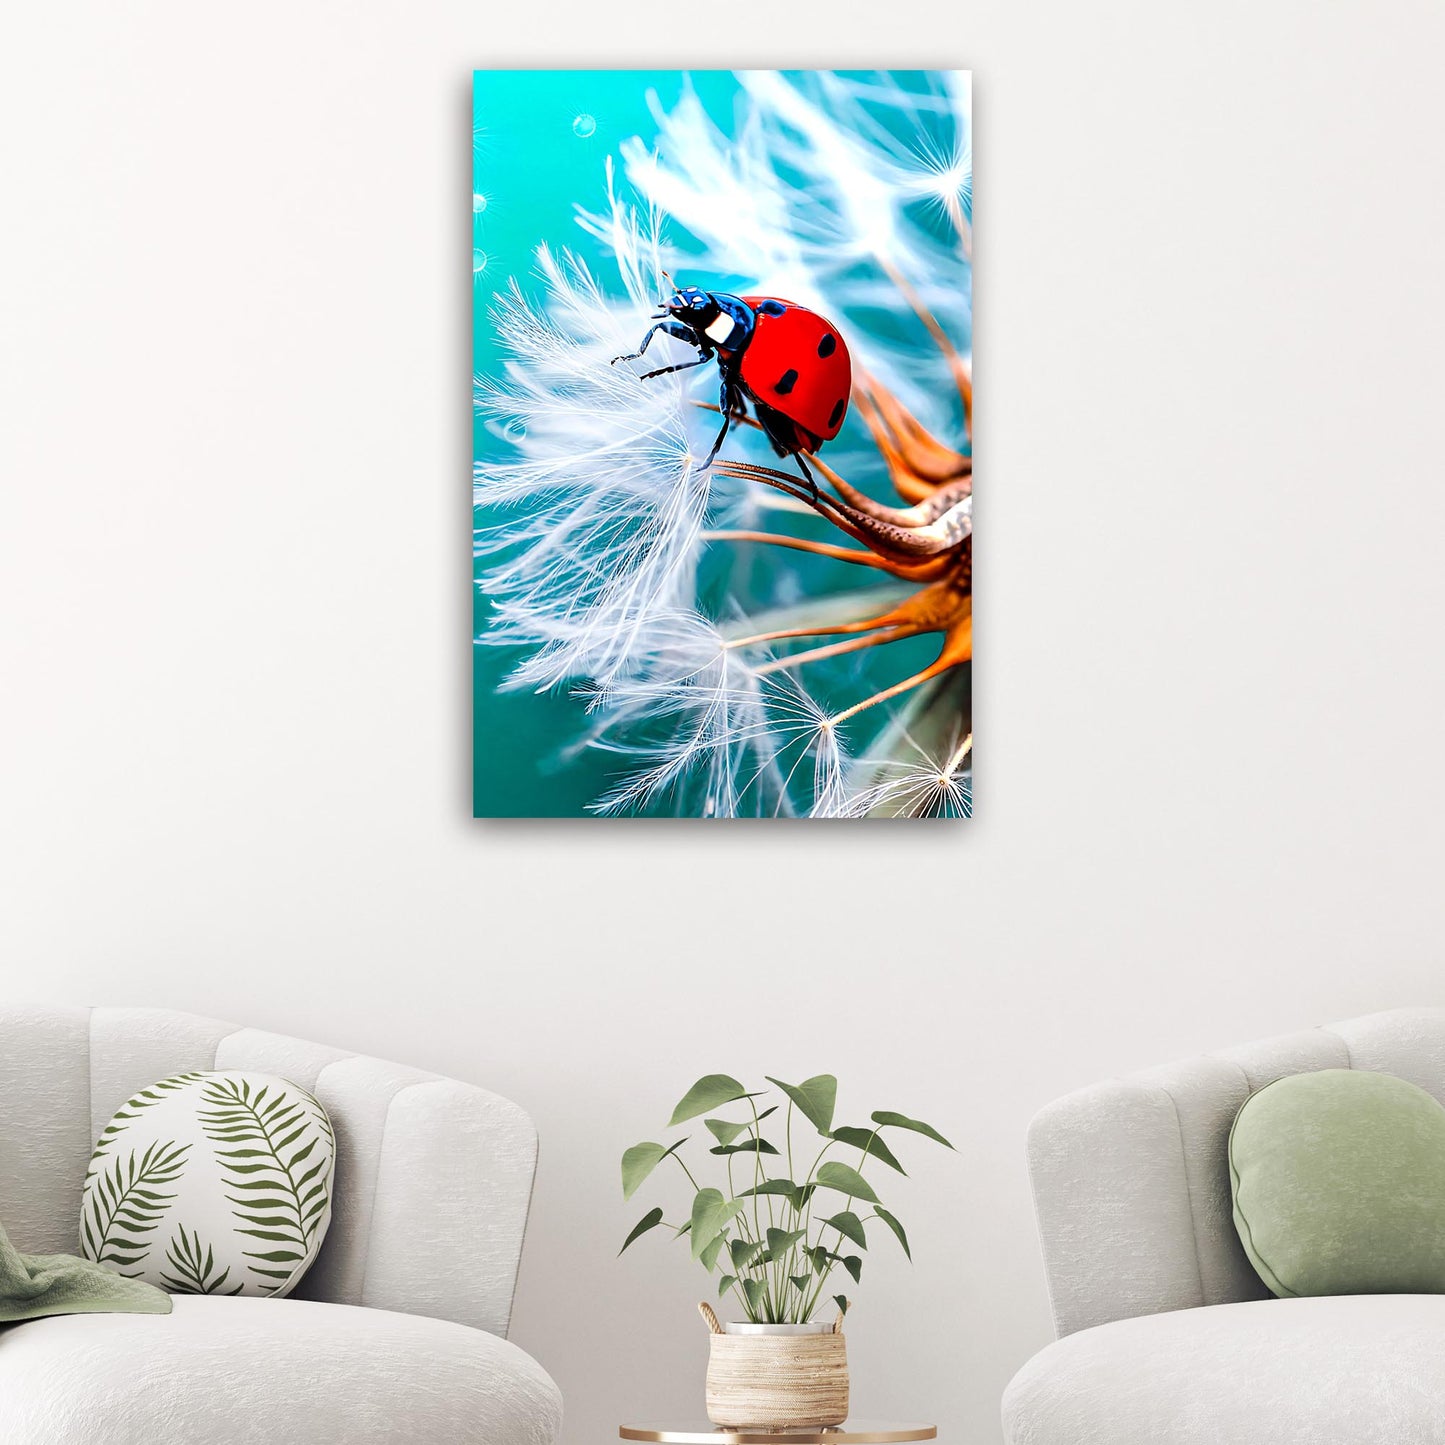 Insect Ladybug Dandelion Flower Canvas Wall Art - Image by Tailored Canvases